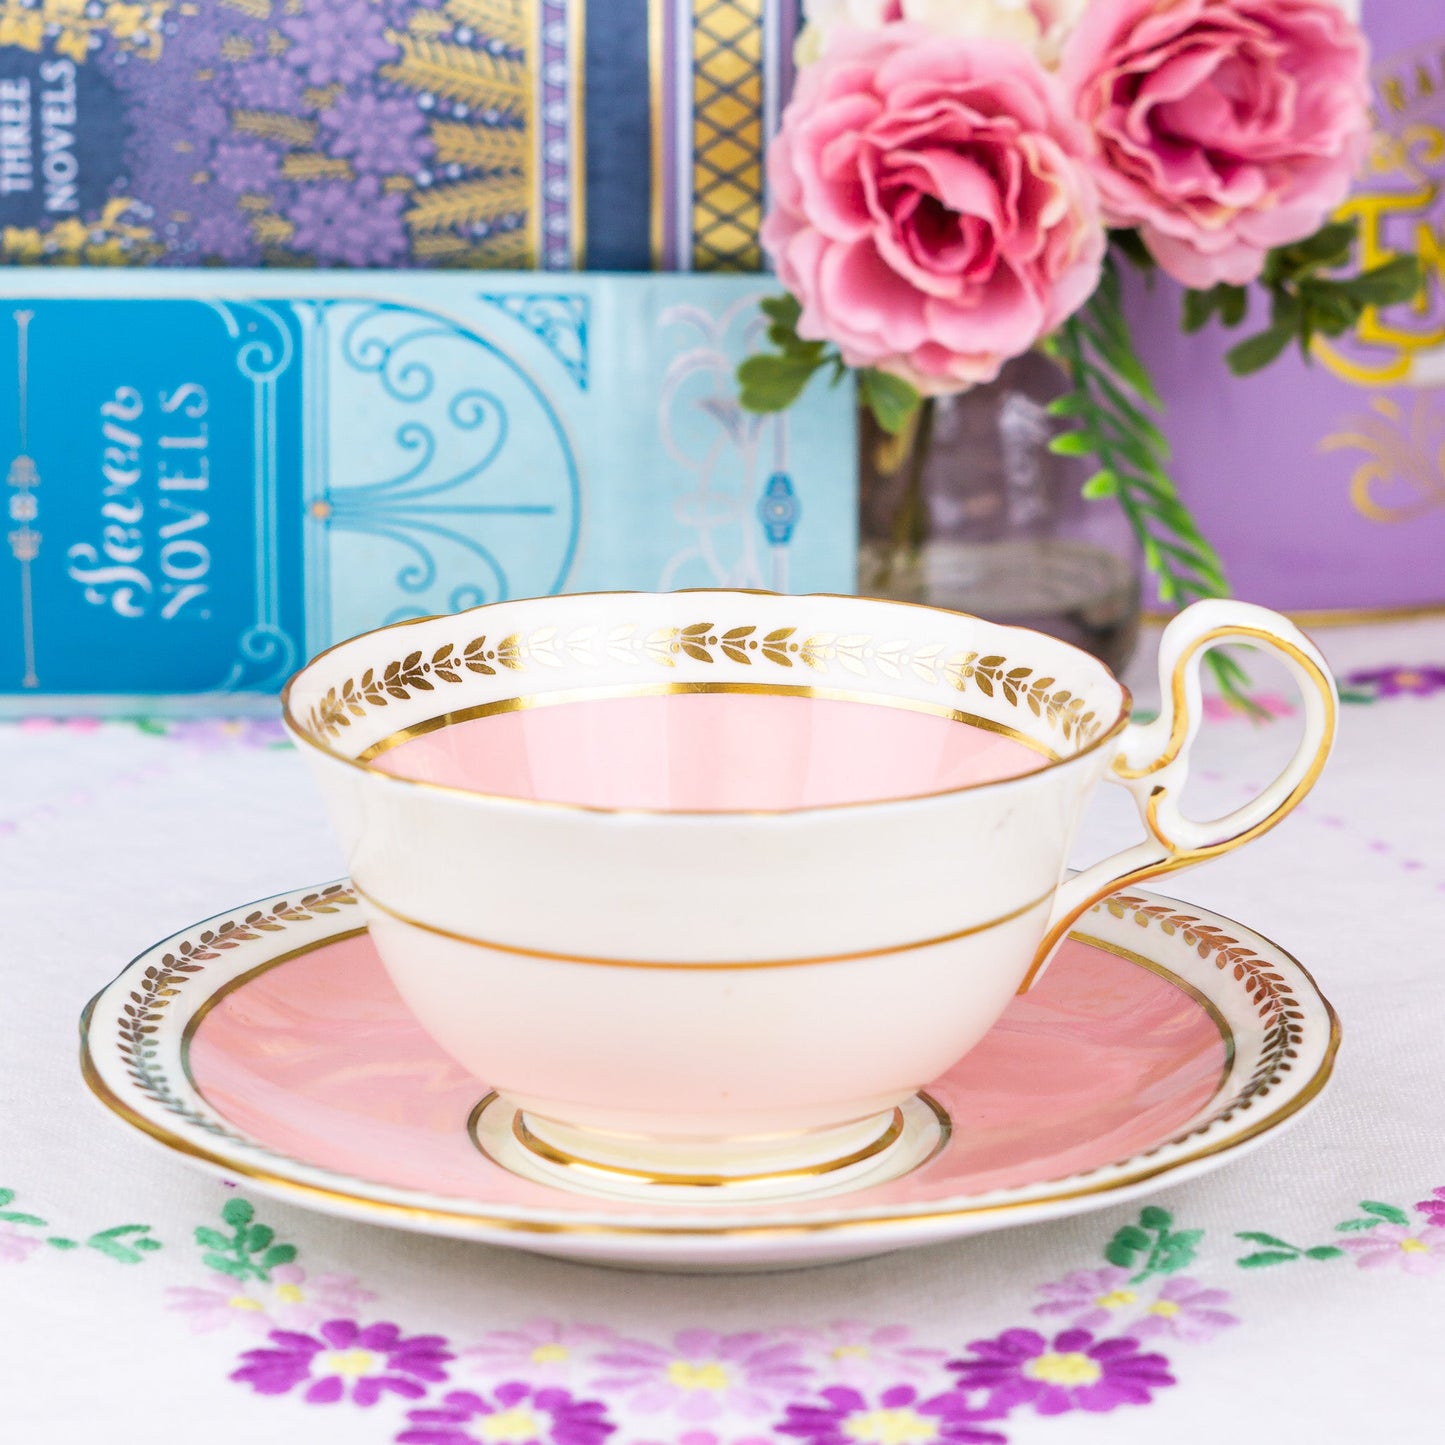 Aynsley Pink Cabinet Teacup and Saucer